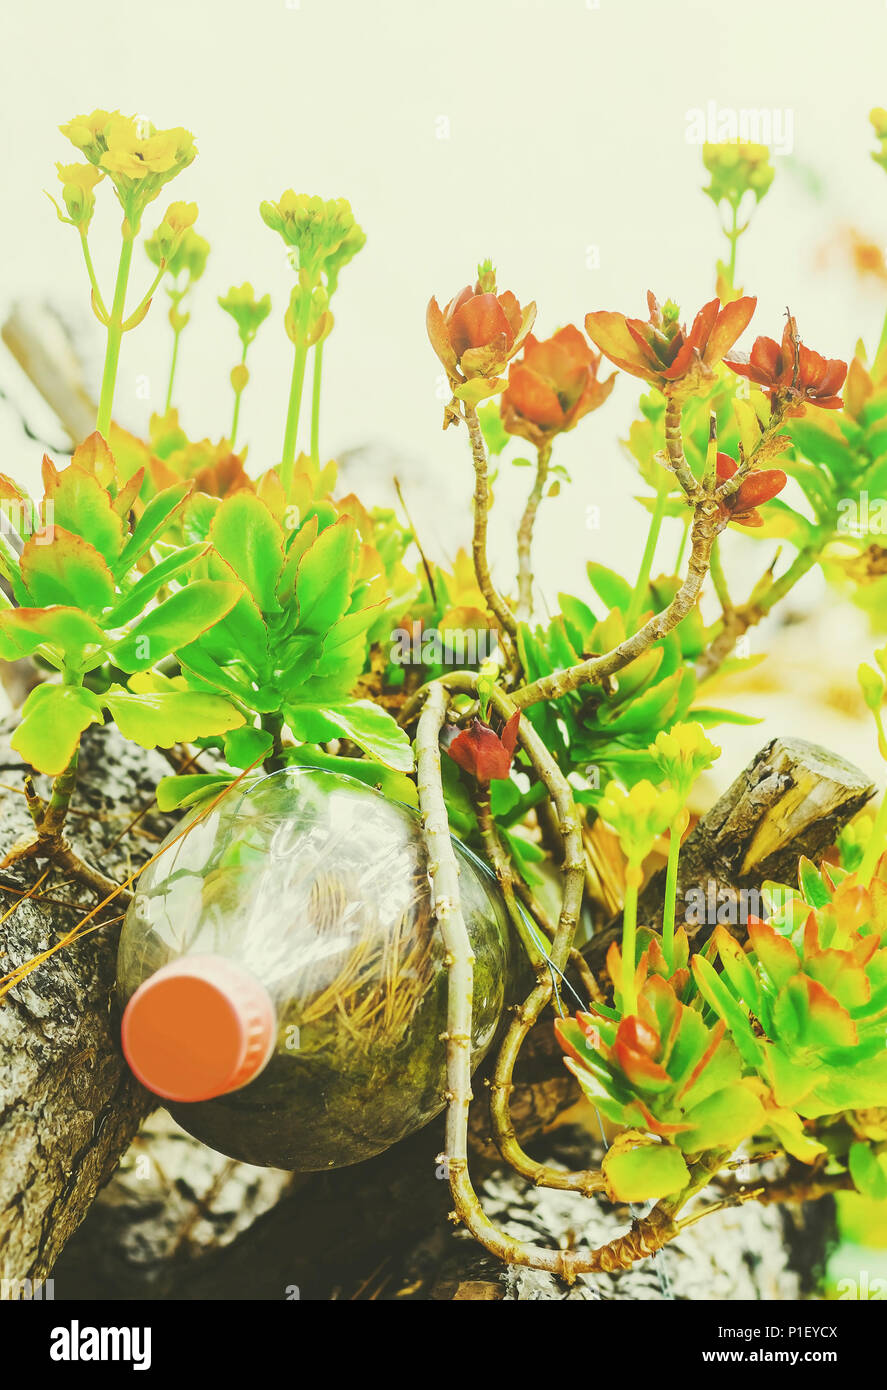 Green plant and flowers growing on a reused soda bottle. Pet bottle used as a vase for a plant. Stock Photo